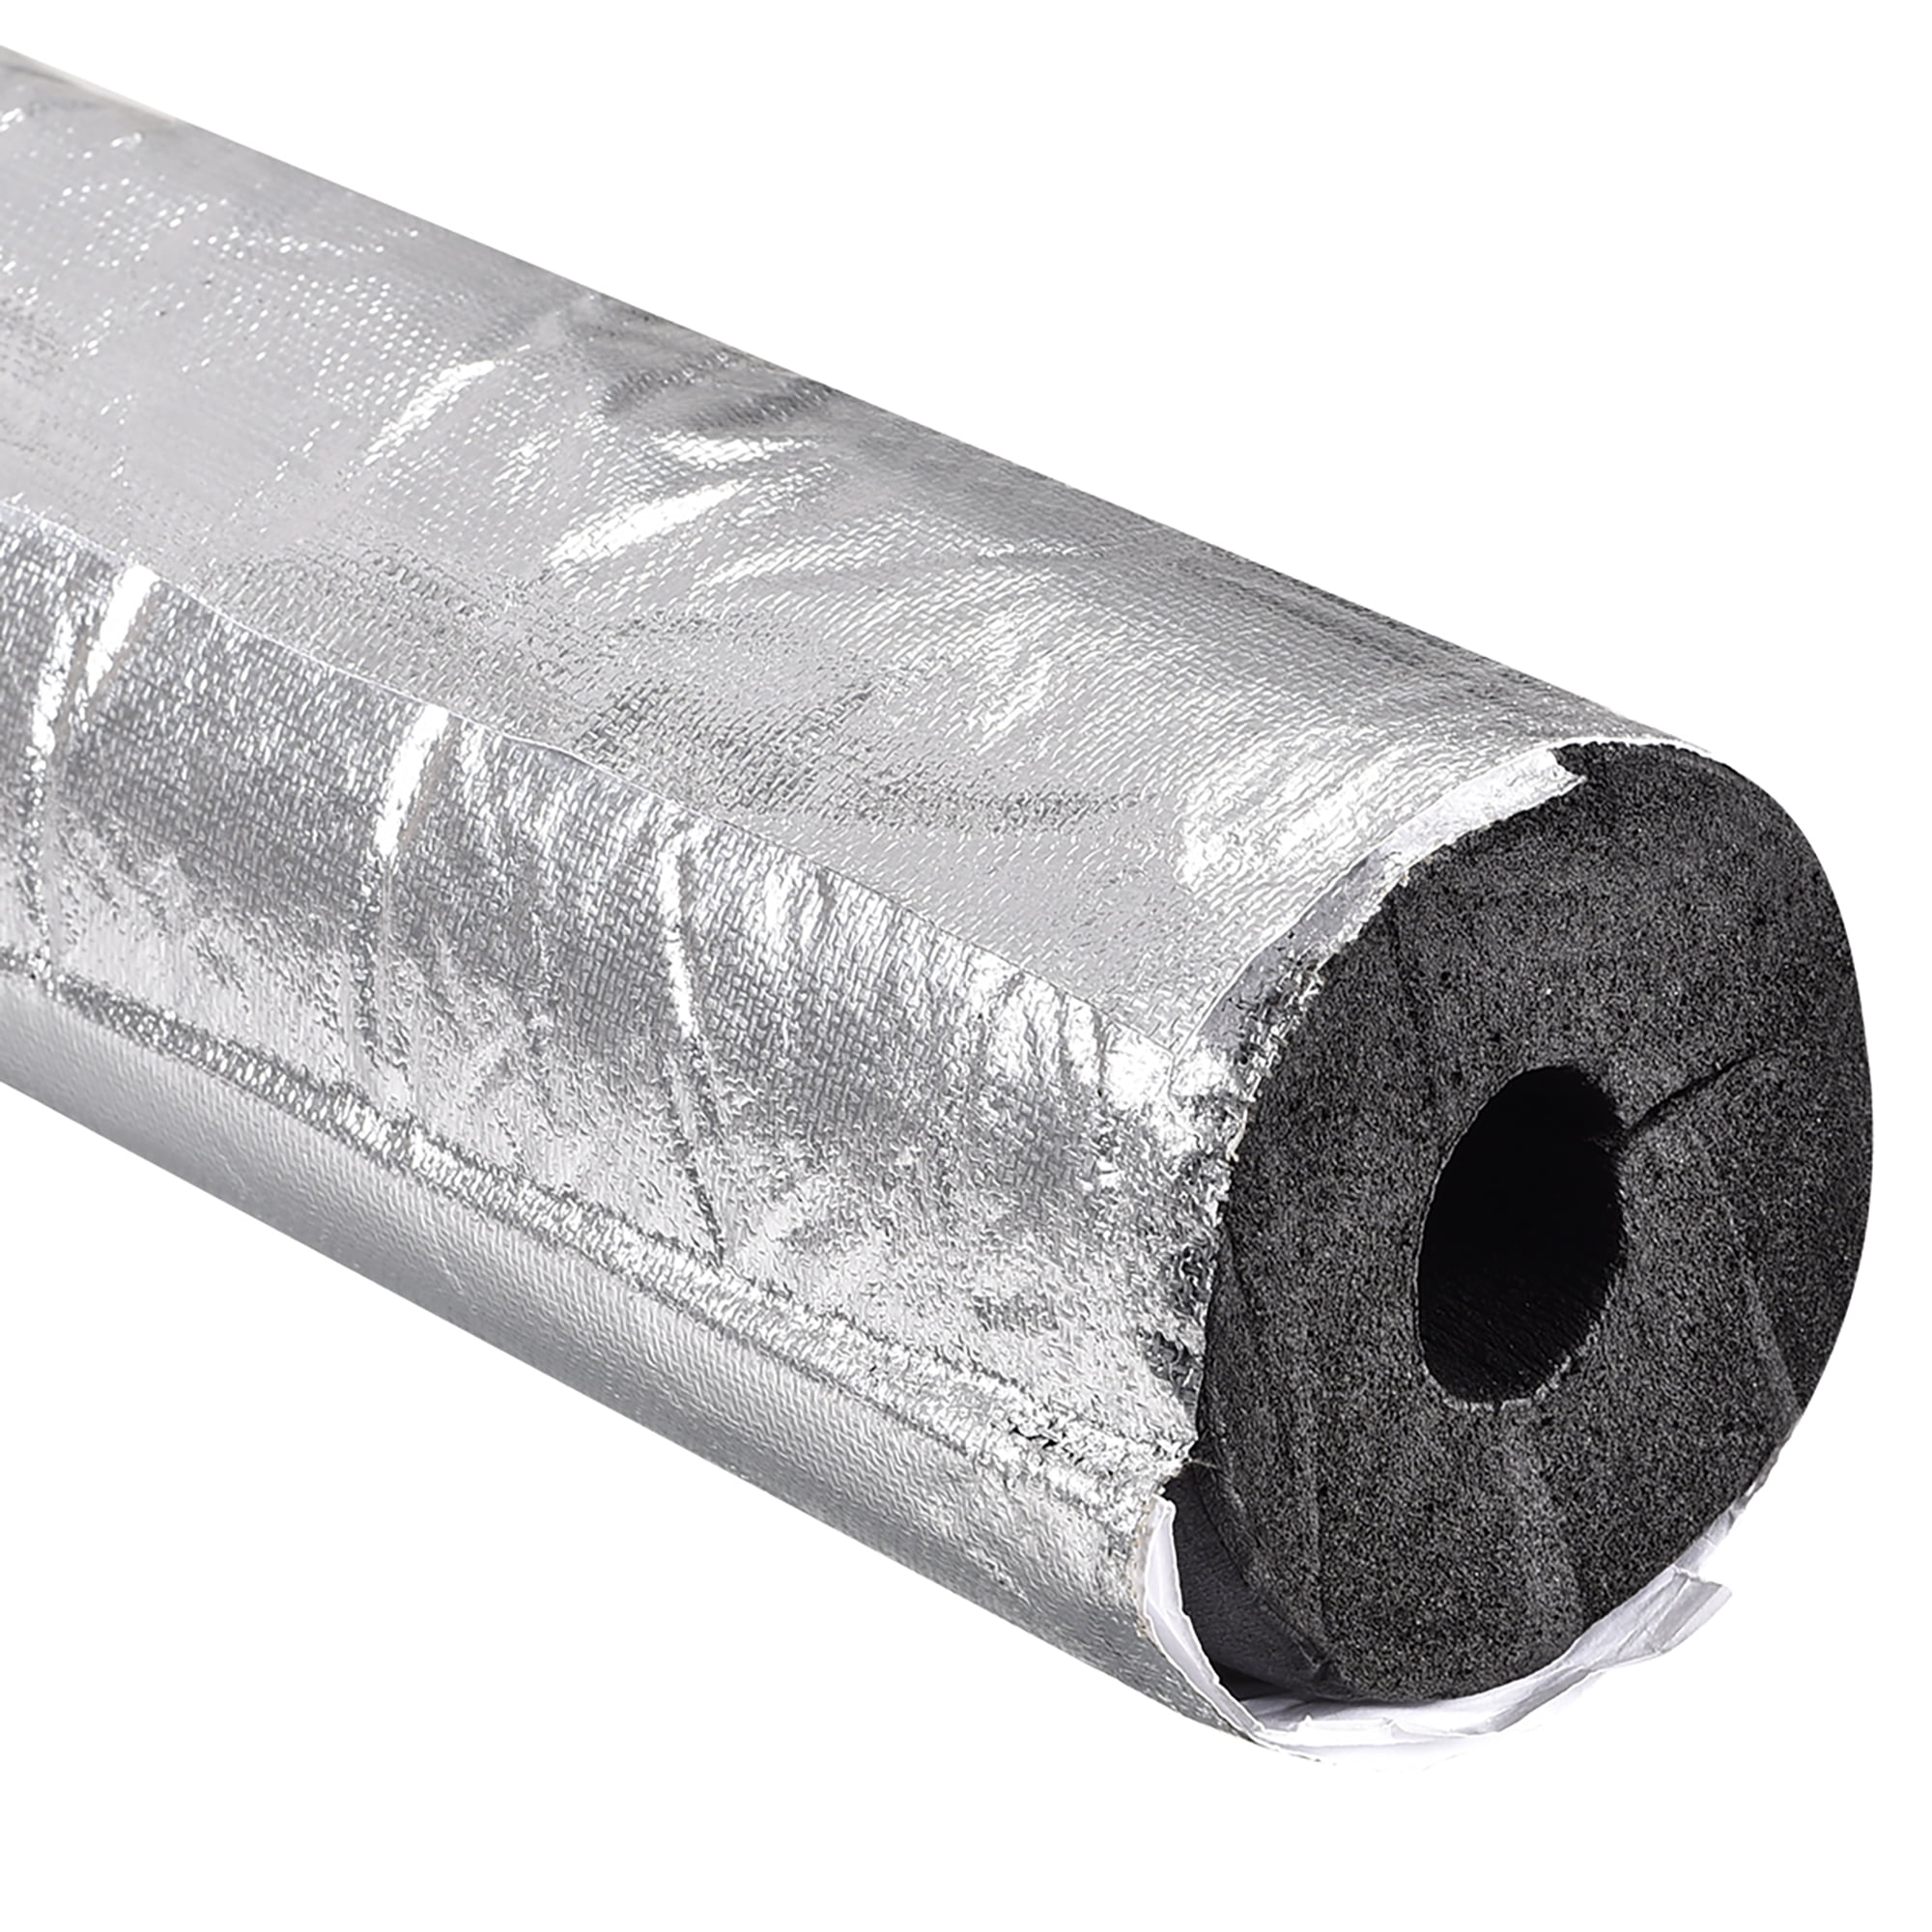 Details about   Pipe Insulation for 1.34" Pipe Adhesive Flap 1.58" Thick Rubber Foam 